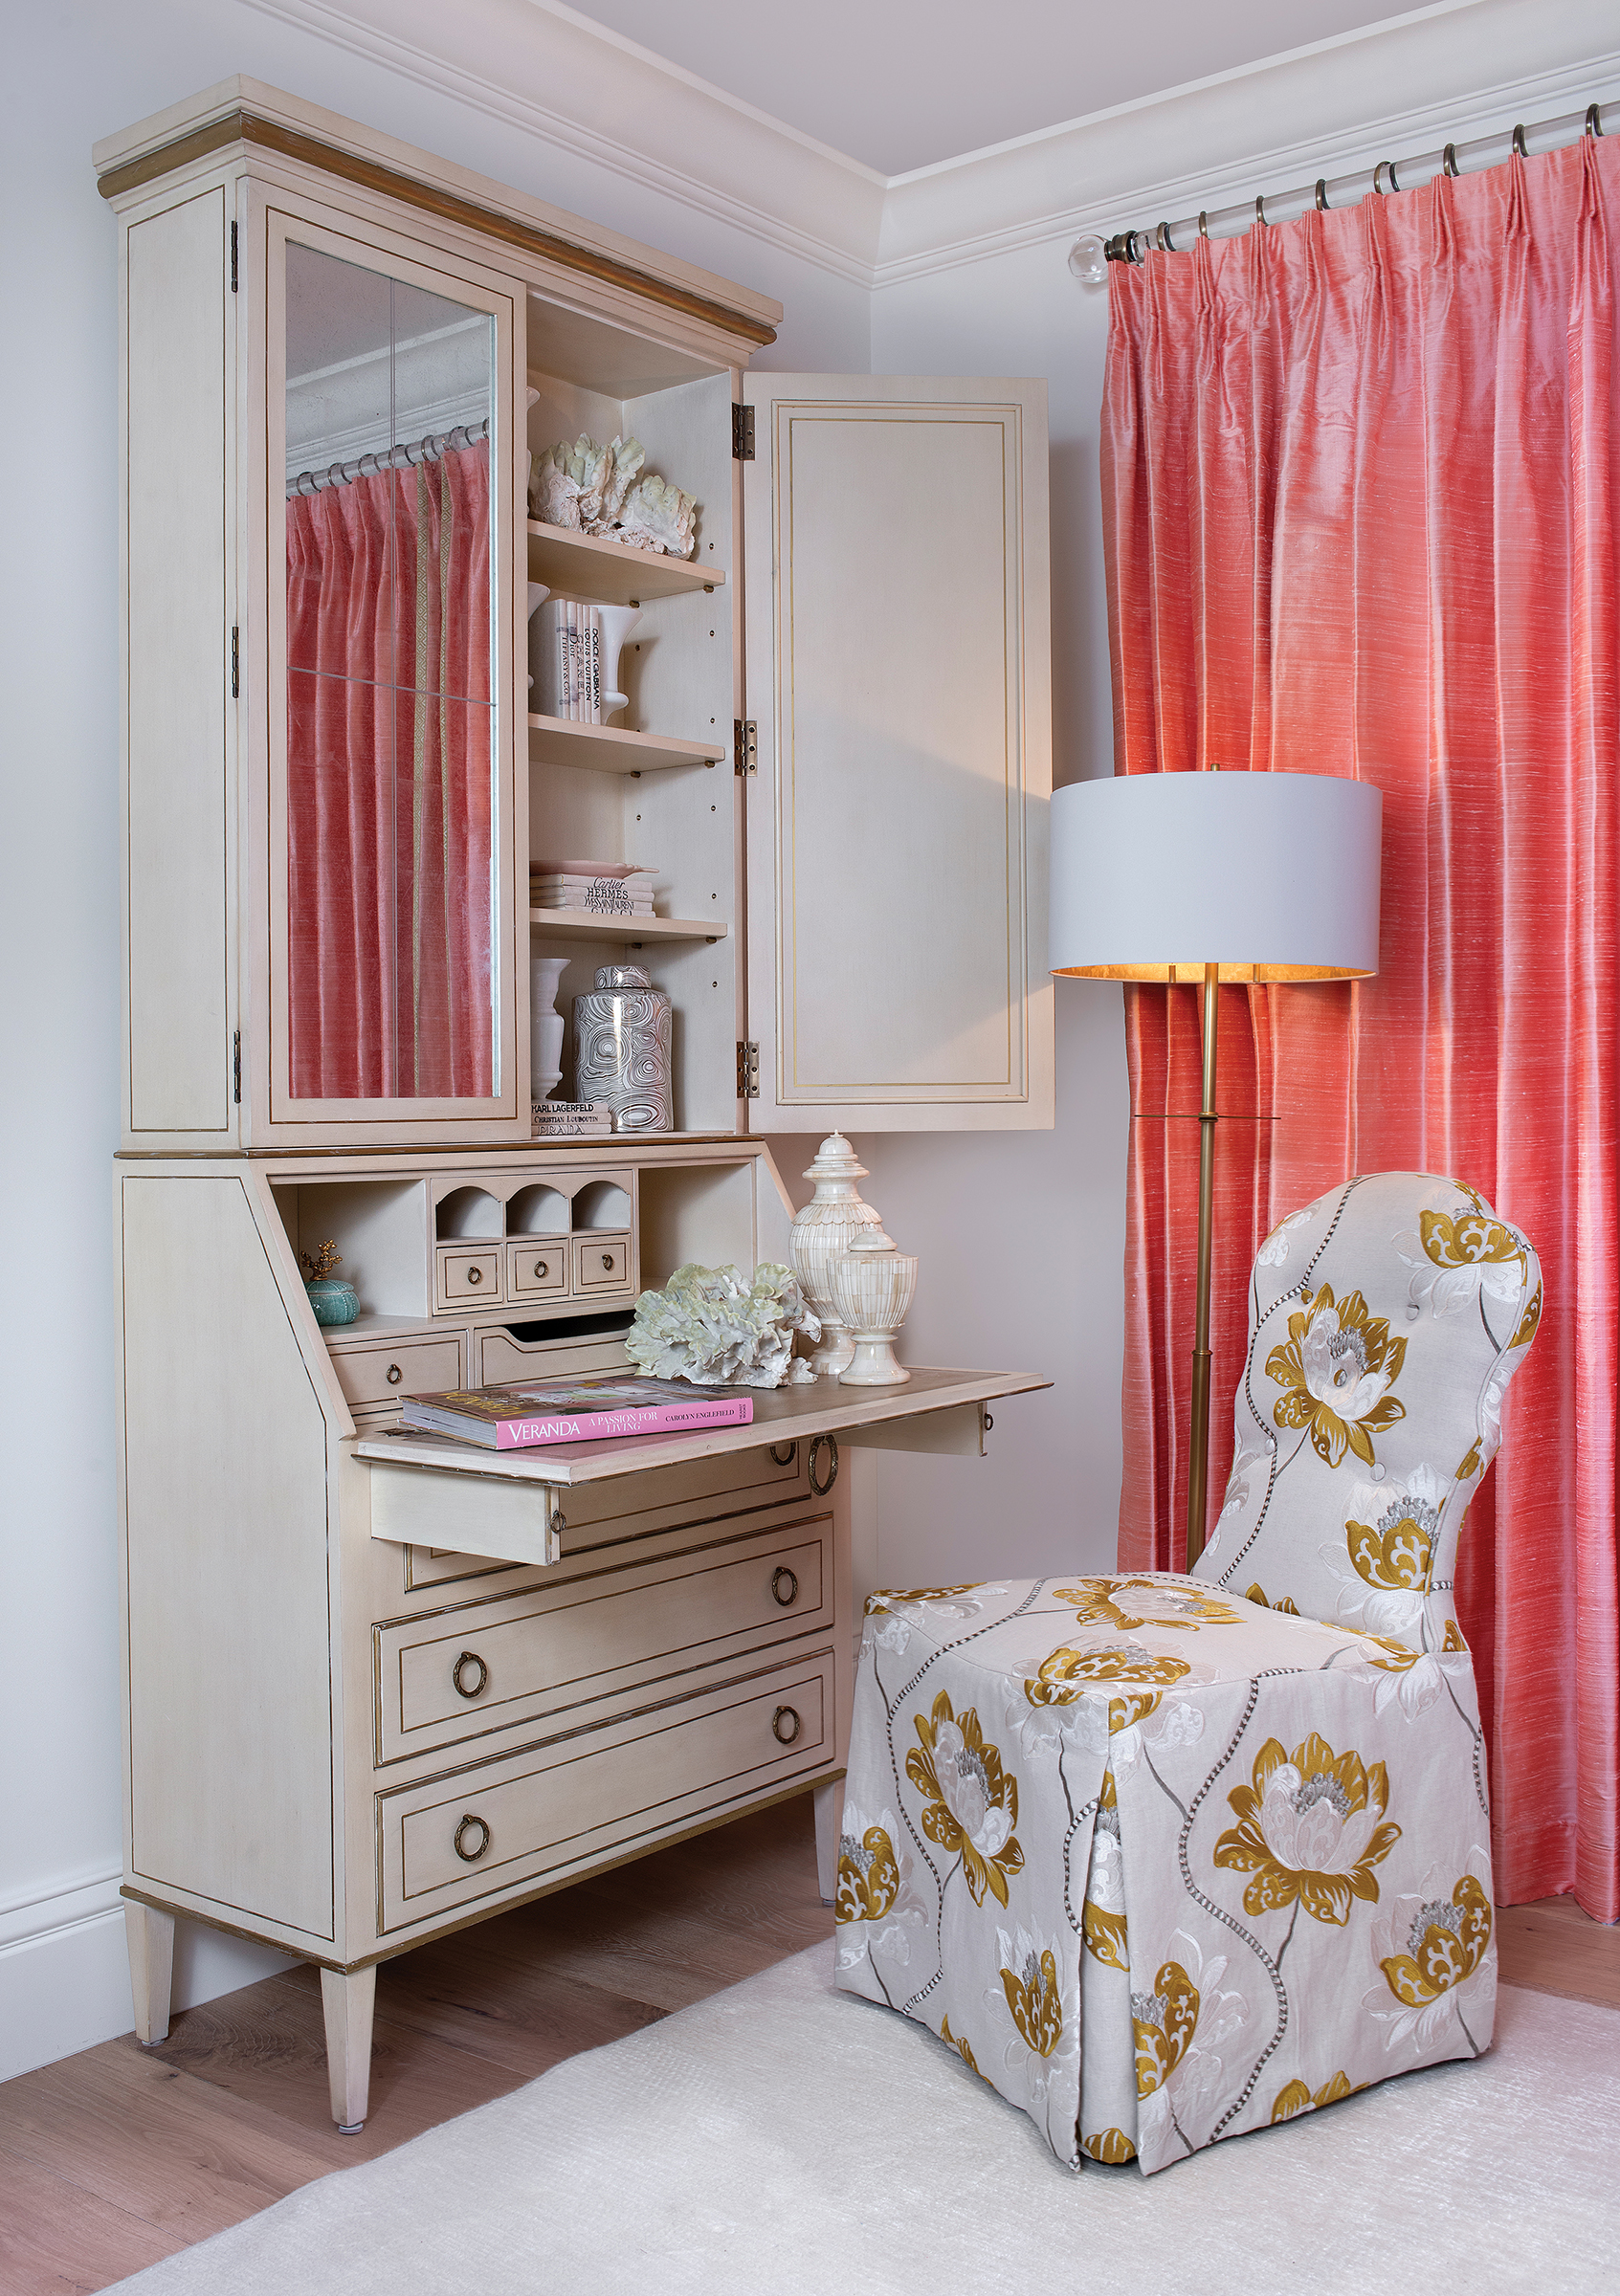  The Leif secretary desk with an Antique Linen finish is a staple of August’s line. An Arden Court chair with imported fabric completes this cozy workspace. French doors dressed in coral draperies fabricated by Statewide Window Treatments open onto t